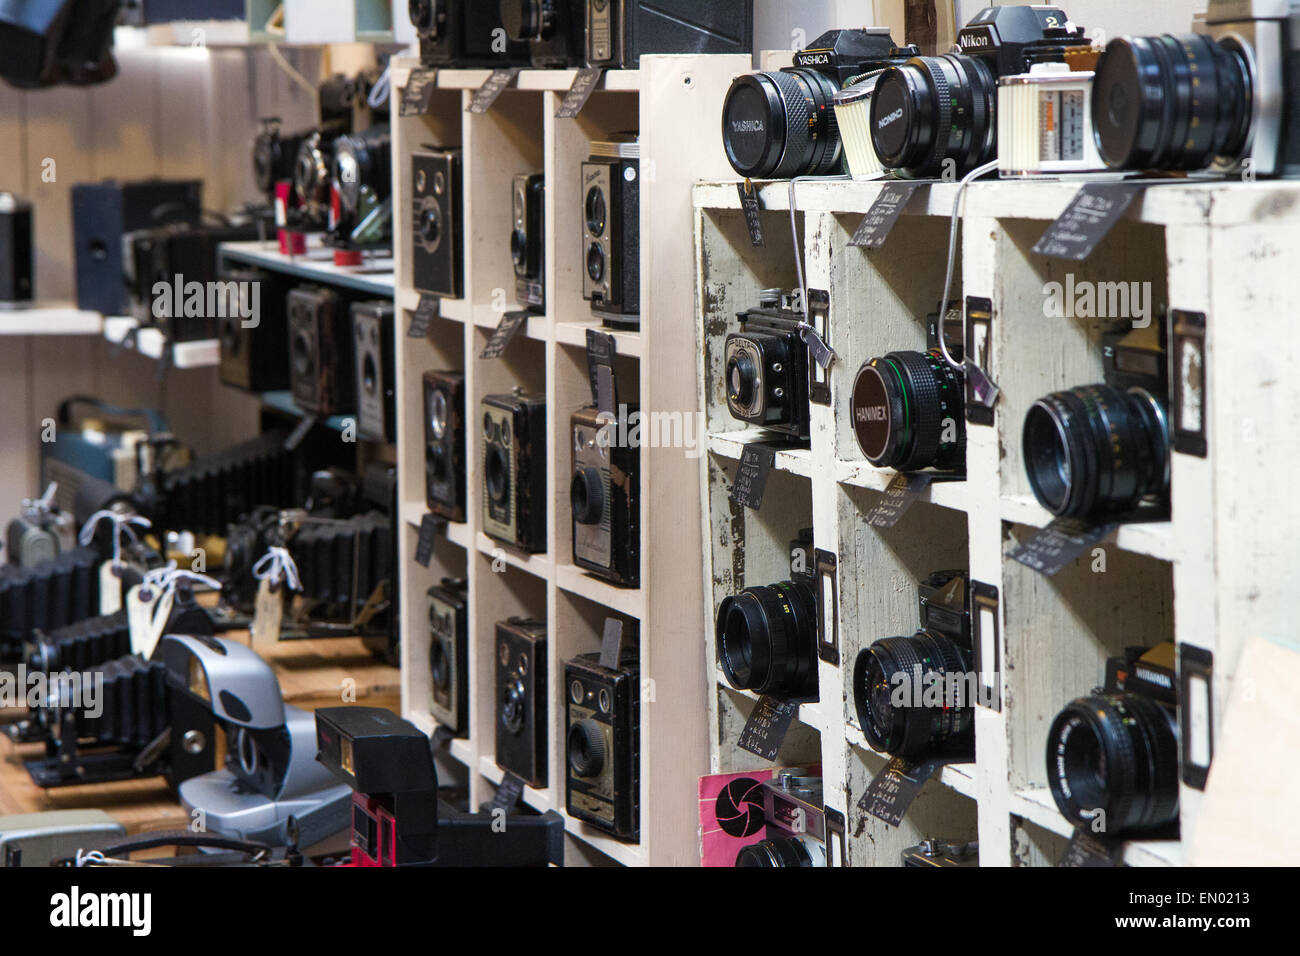 Second Hand Cameras On Sale At Camden Market London Stock Photo